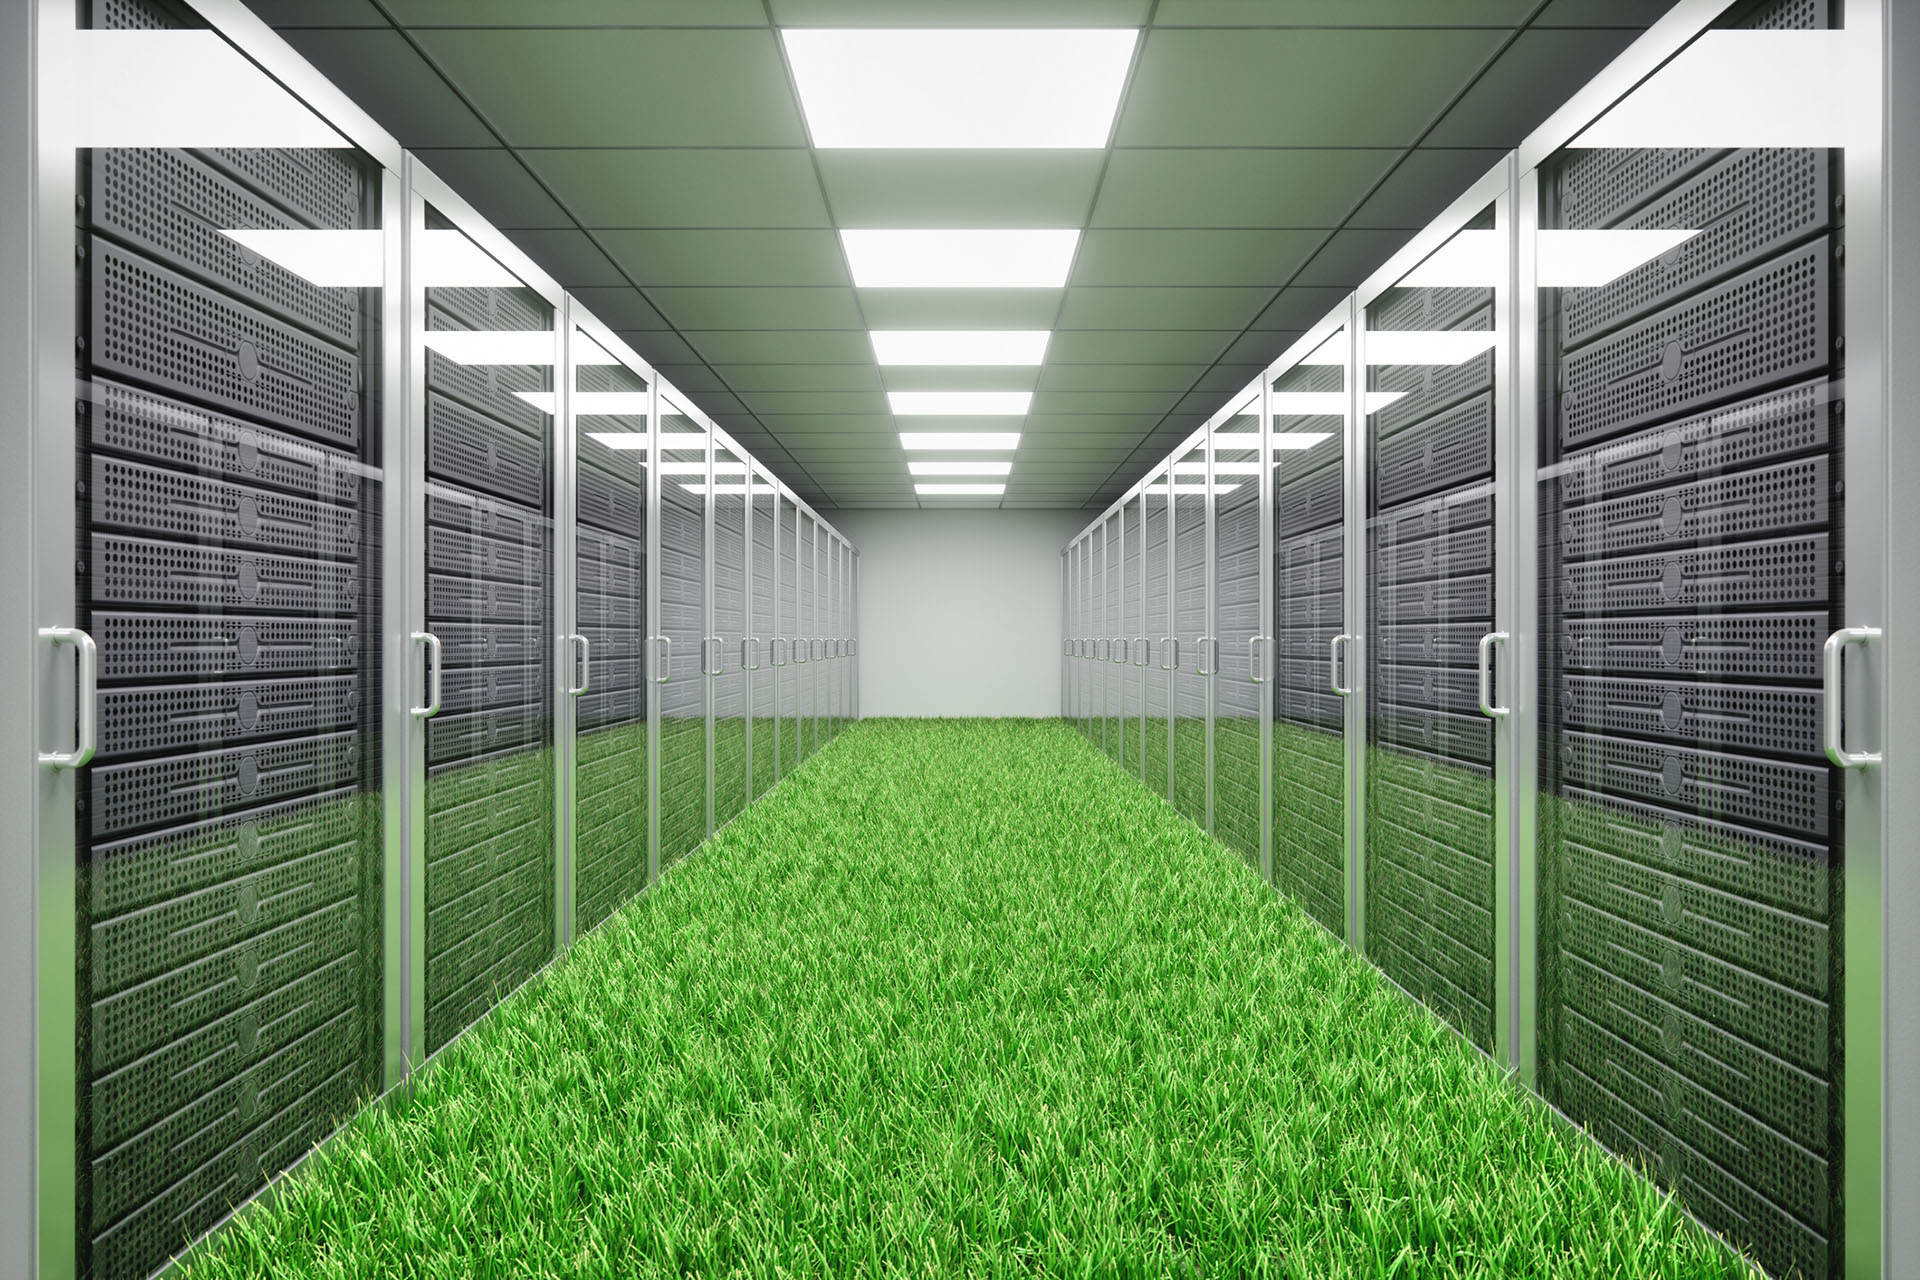 Decarbonizing Data Centers Gives Grid Flexibility